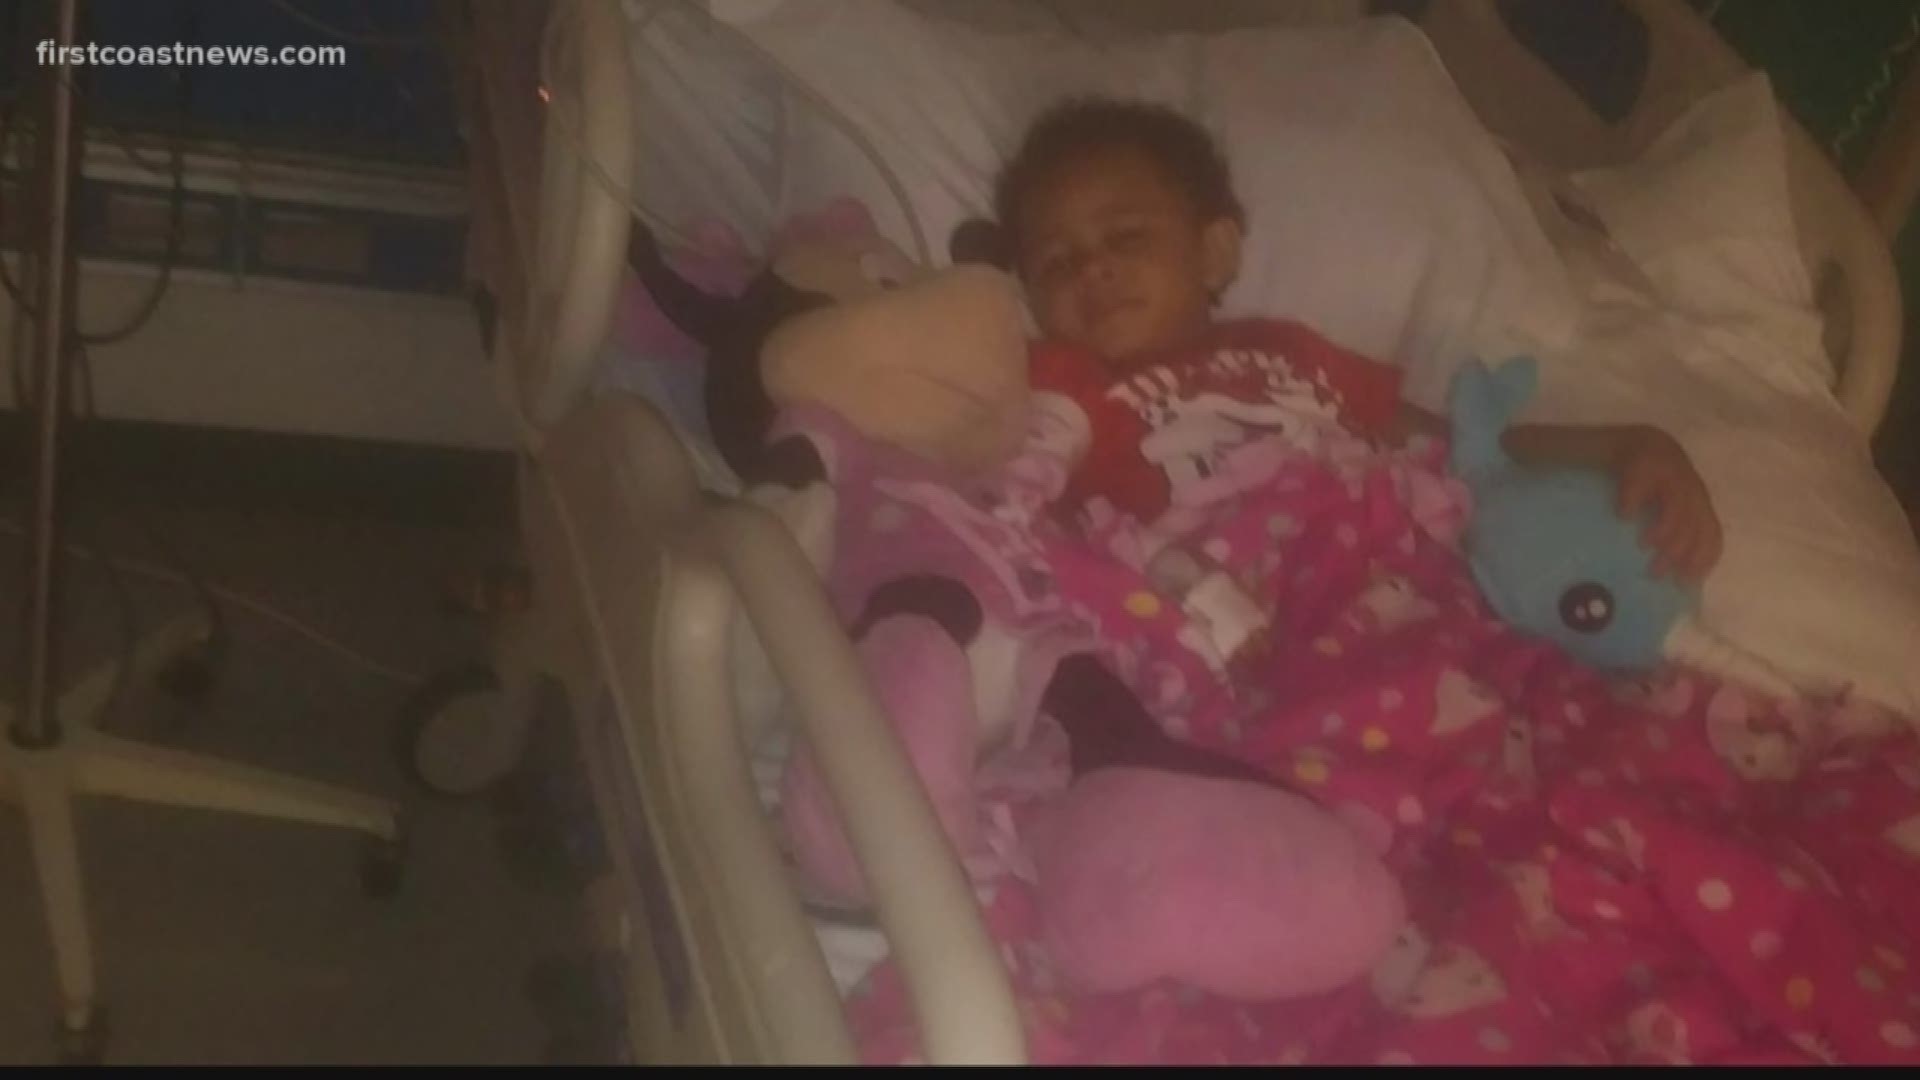 A second case of the rare disease known as Acute Flaccid Myeltis (AFM), which is an illness similar to polio, is being tested for in a child by Wolfson Children's Hospital.